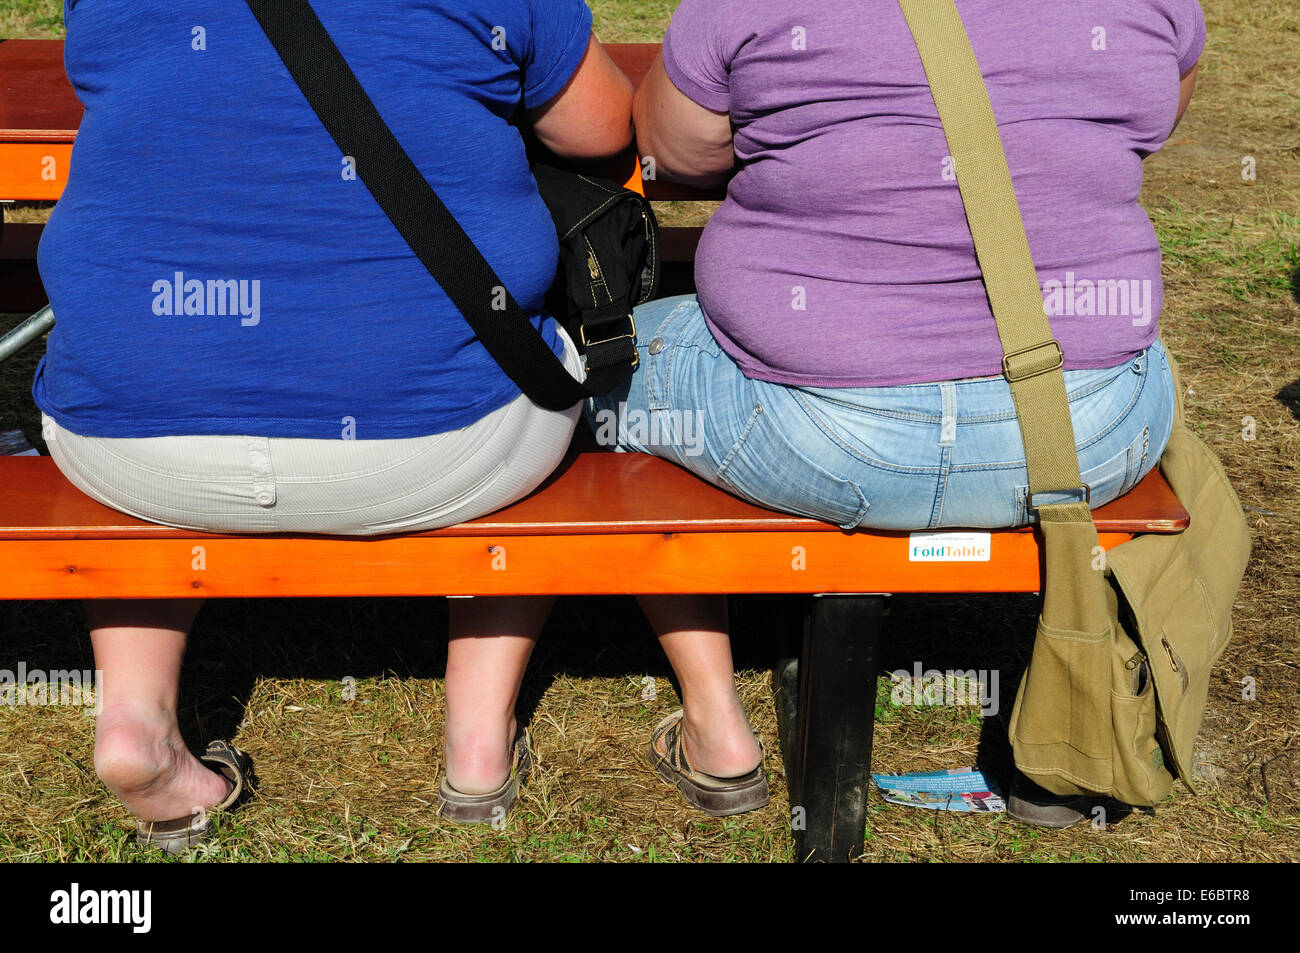 Two fat women sitting on a bench Stock Photo